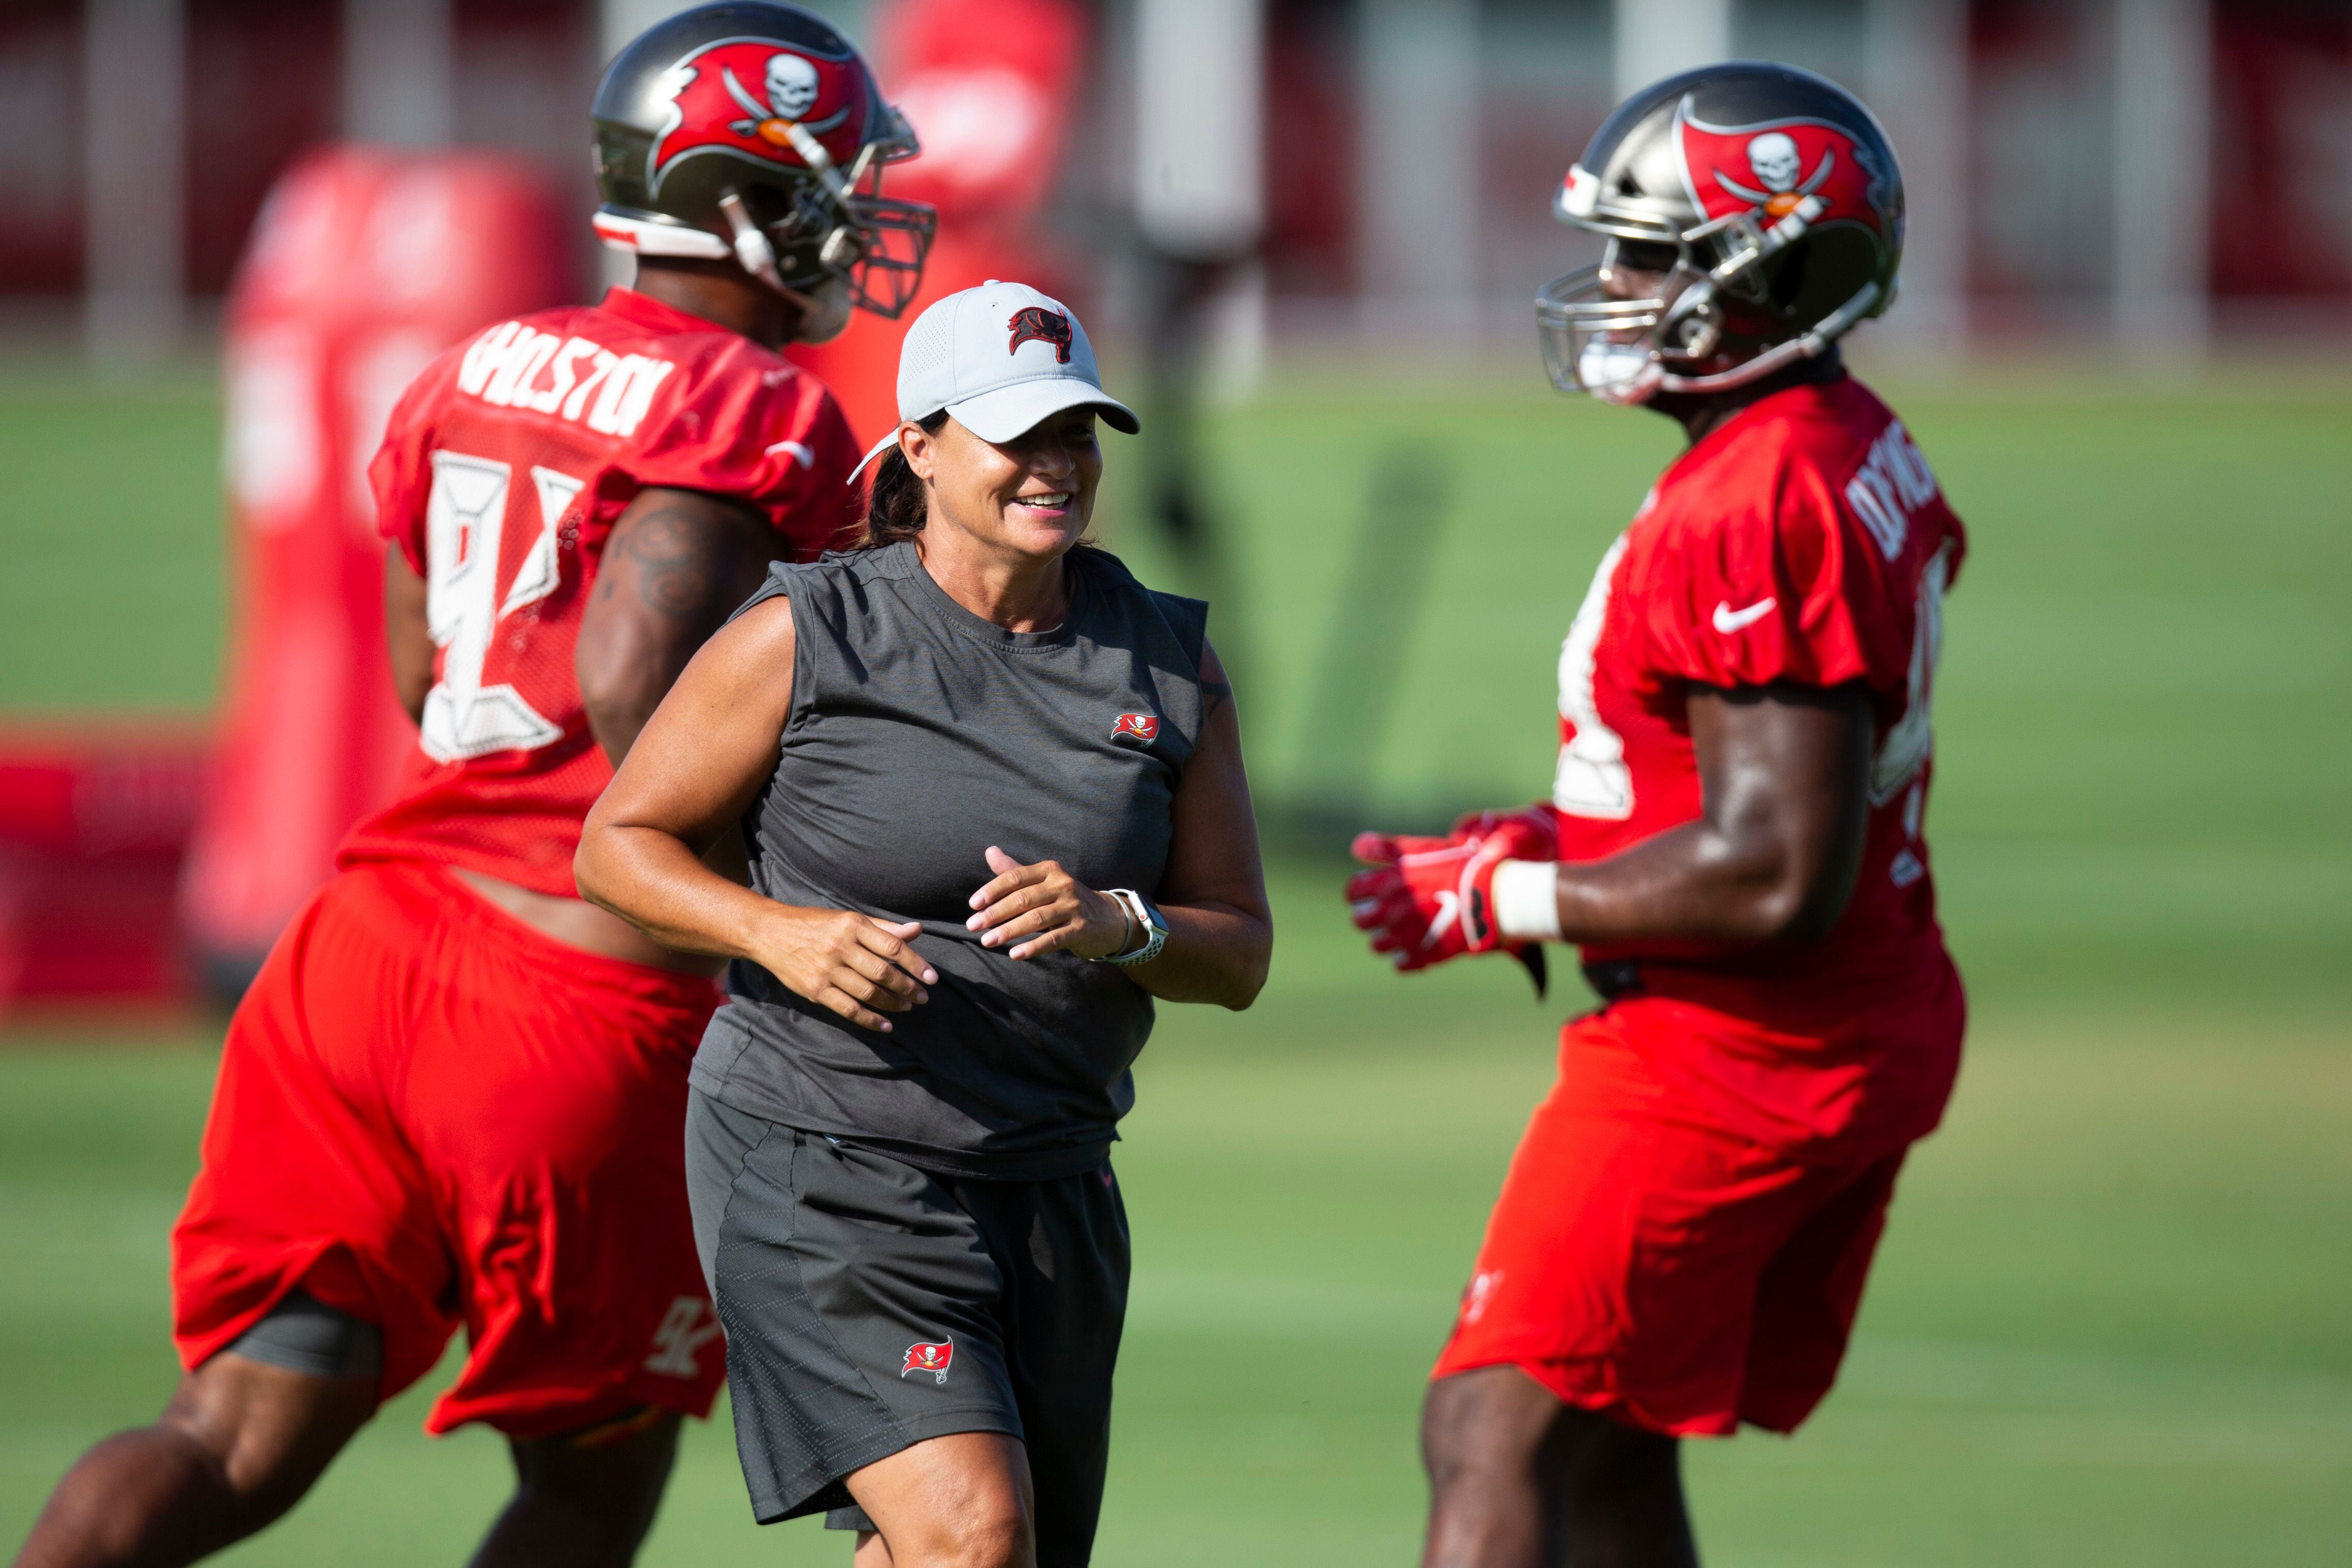 Philly-born Temple product Lori Locust makes history as a female NFL coach  even if that wasn't her goal